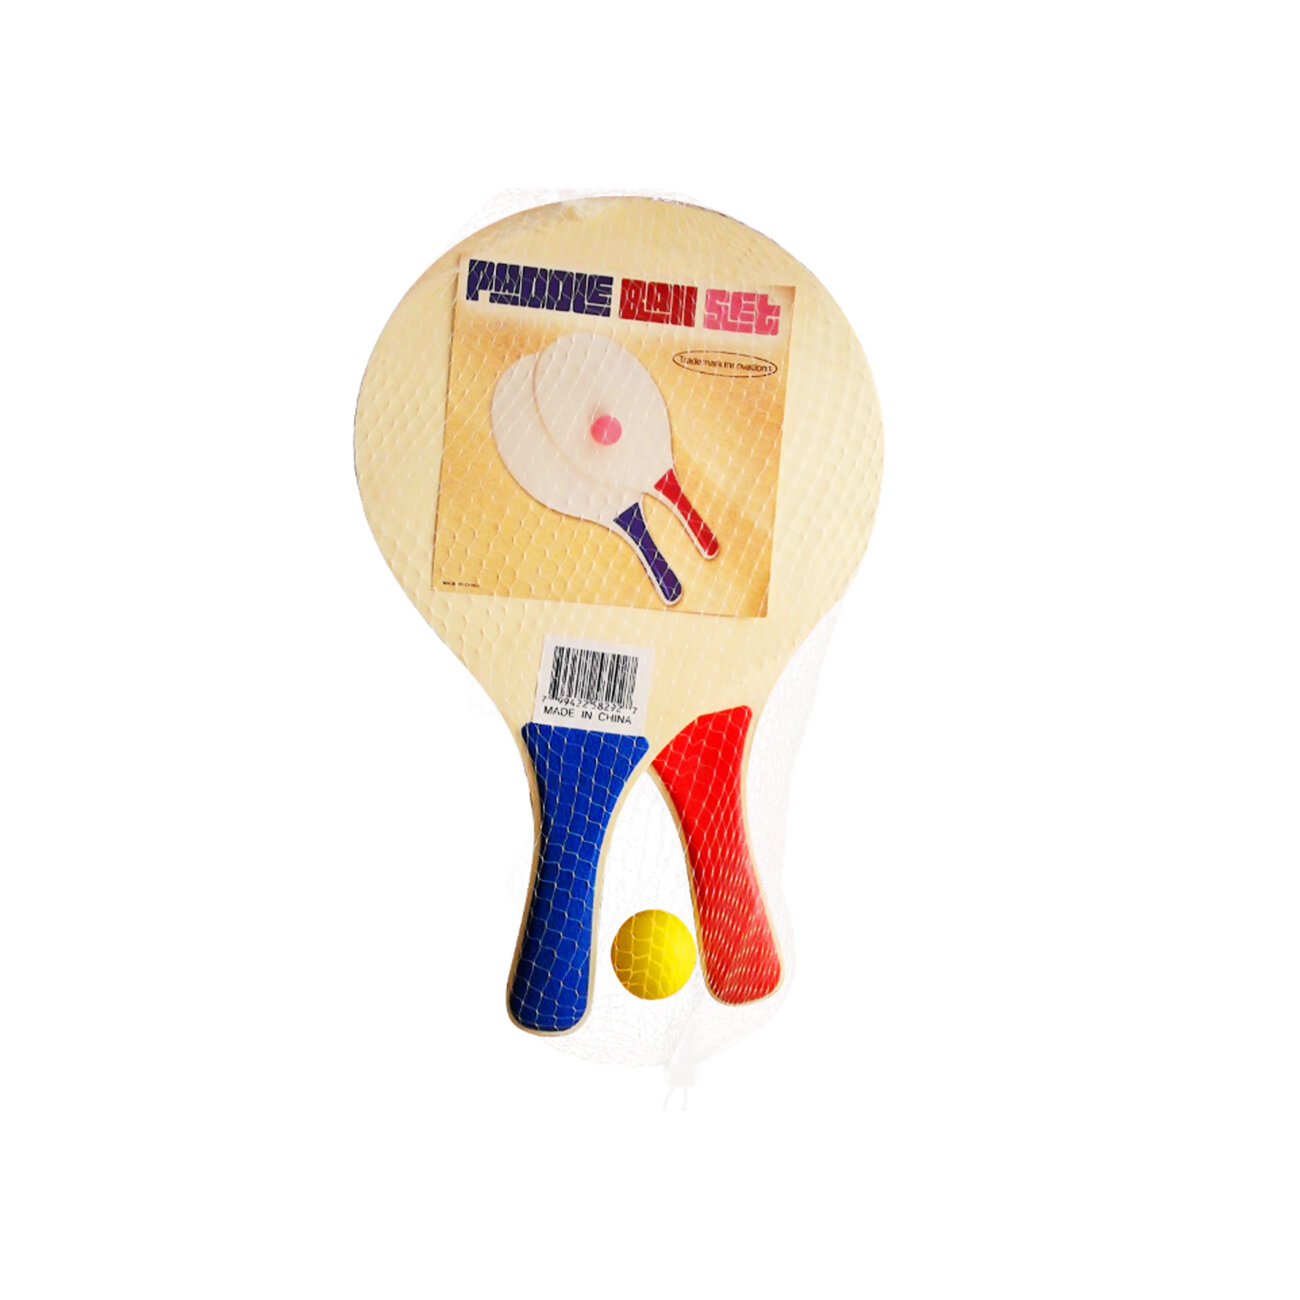 Wooden Beach Paddle Ball 2 Paddles Racket Game Table Tennis Badminton Game USA 